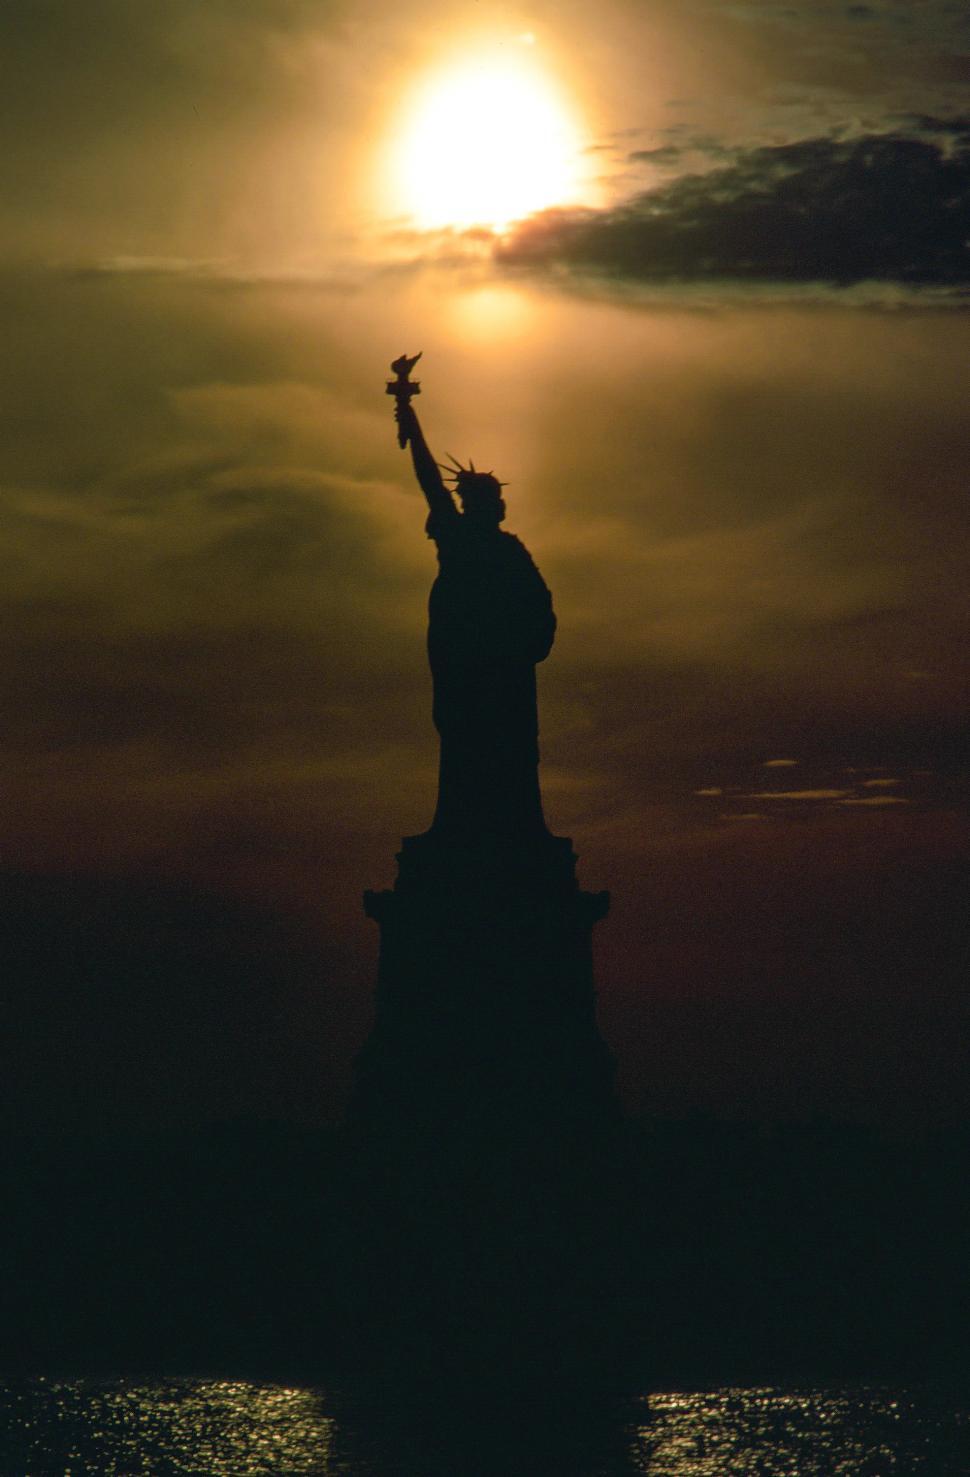 Free Image of Statue of Liberty 